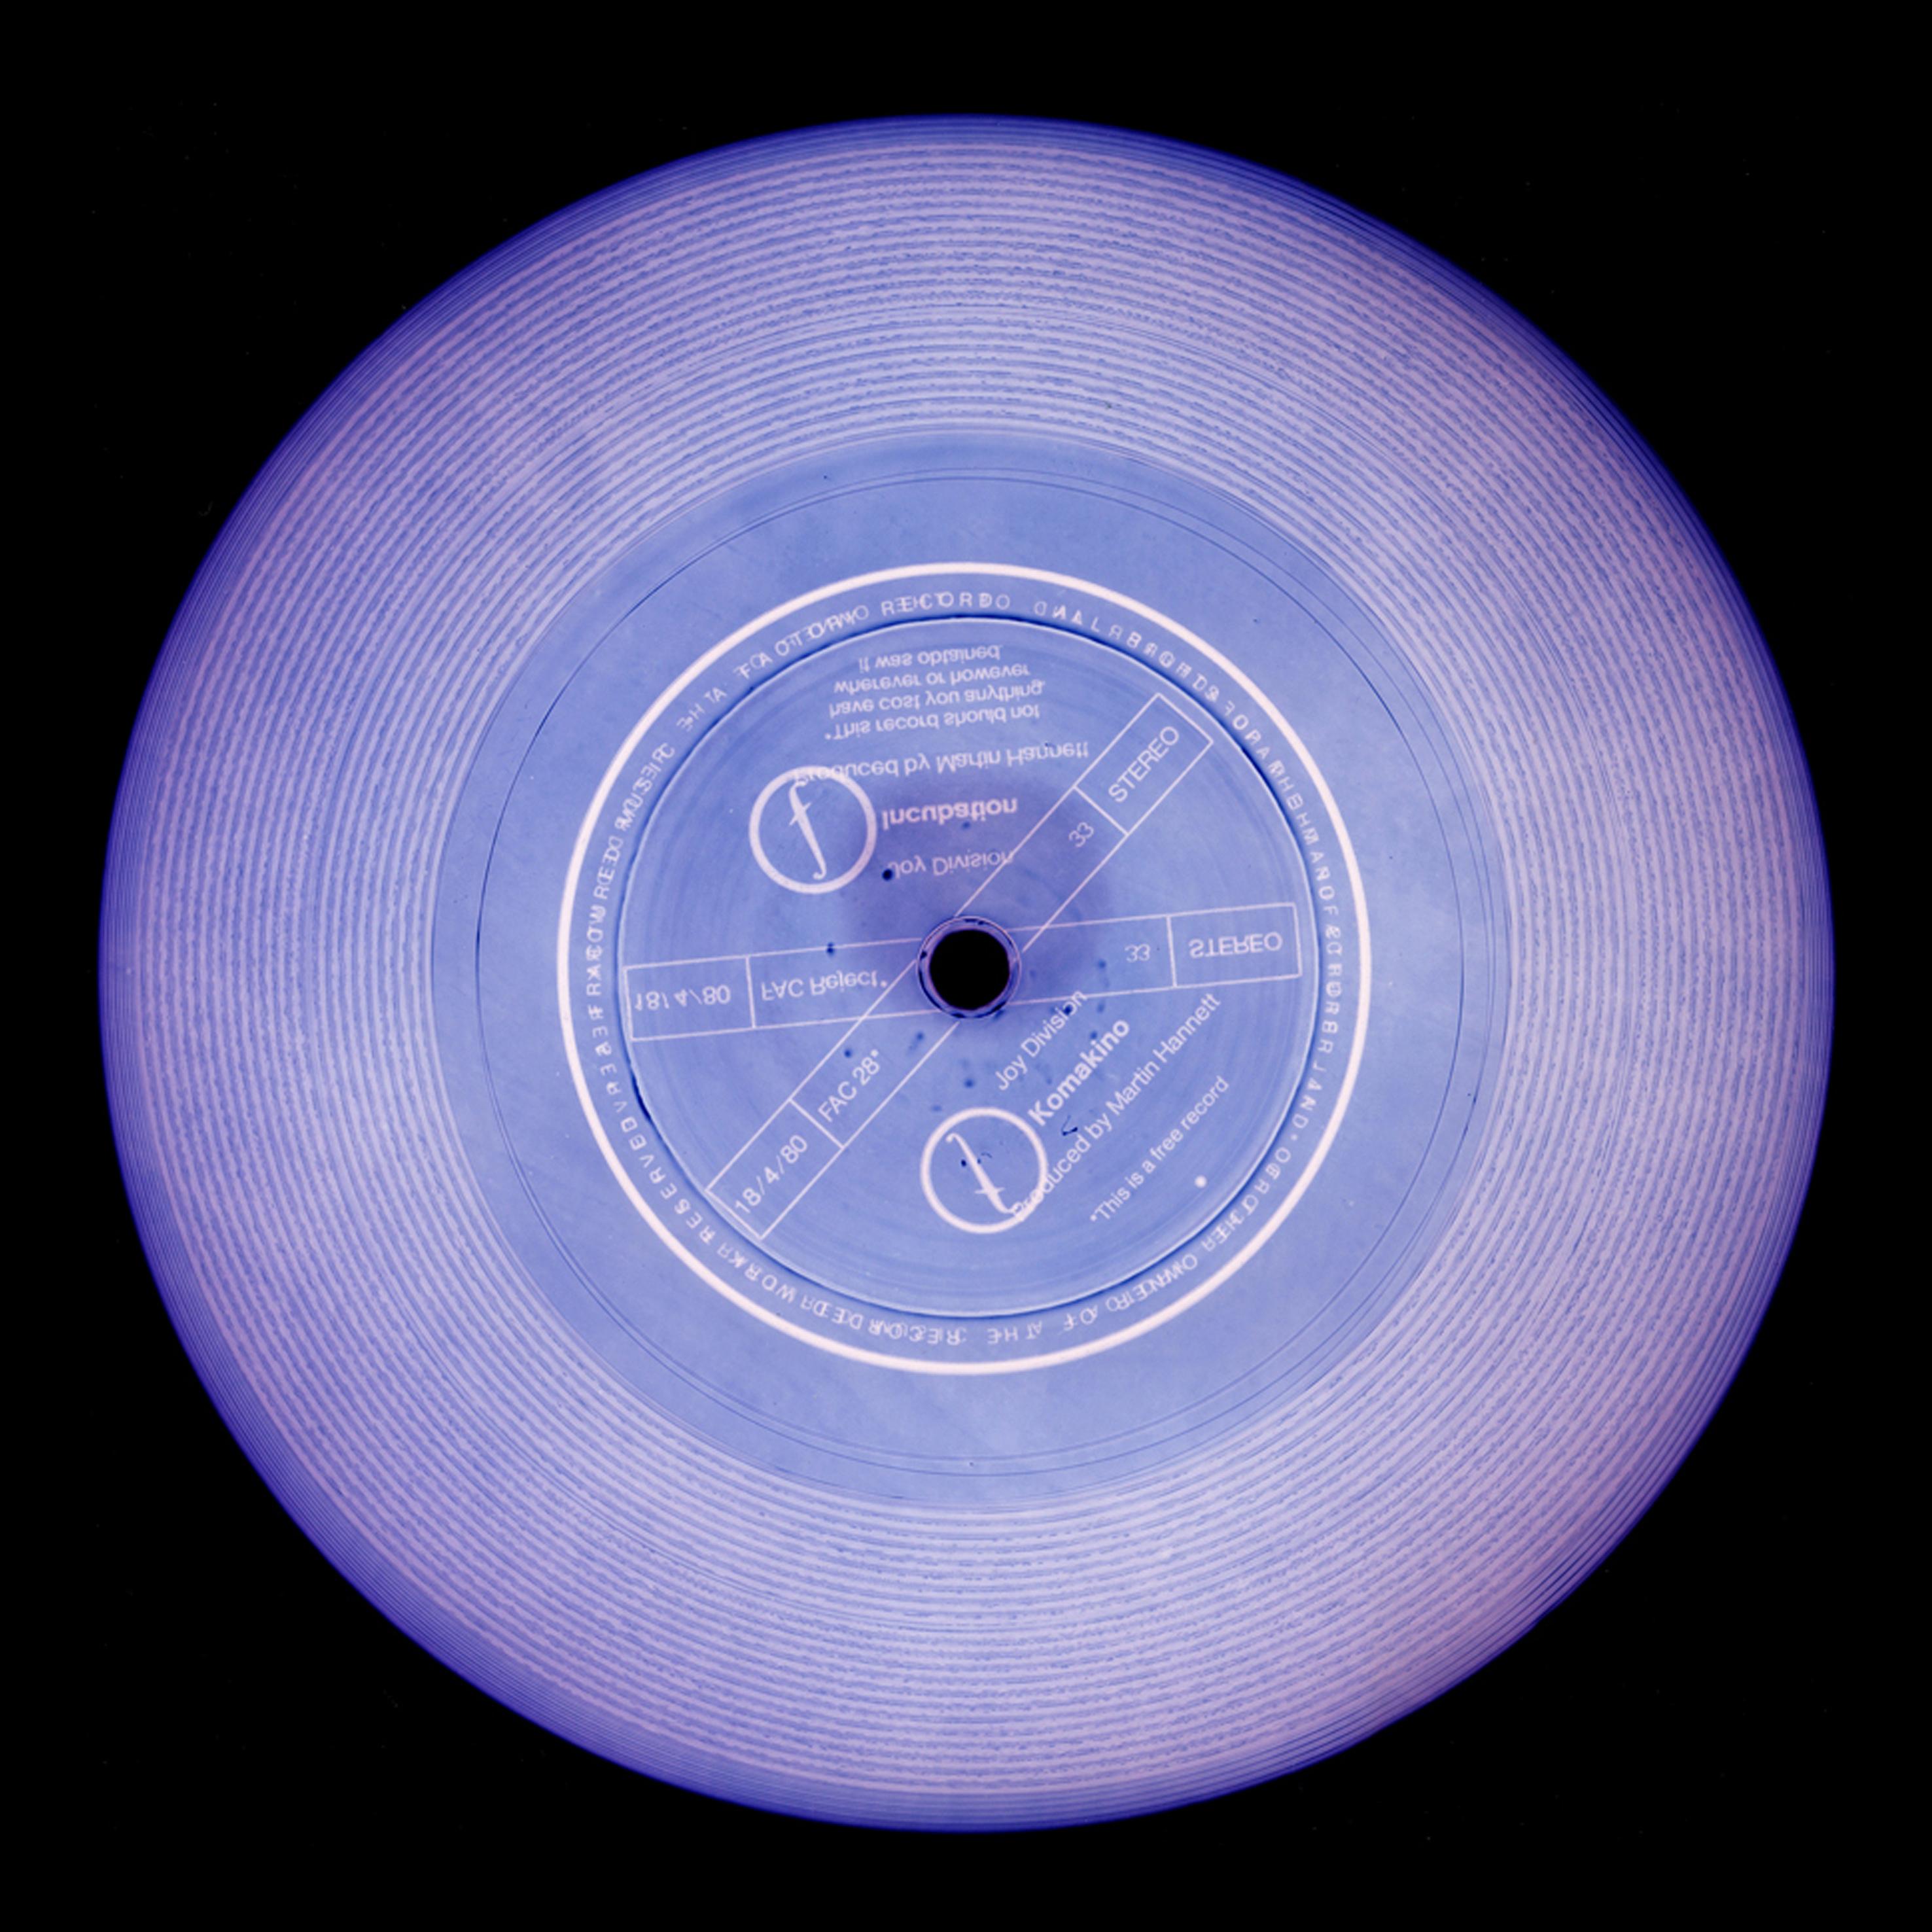 Heidler & Heeps Print - Vinyl Collection, This is a Free Record (Lavender) - Conceptual Photography